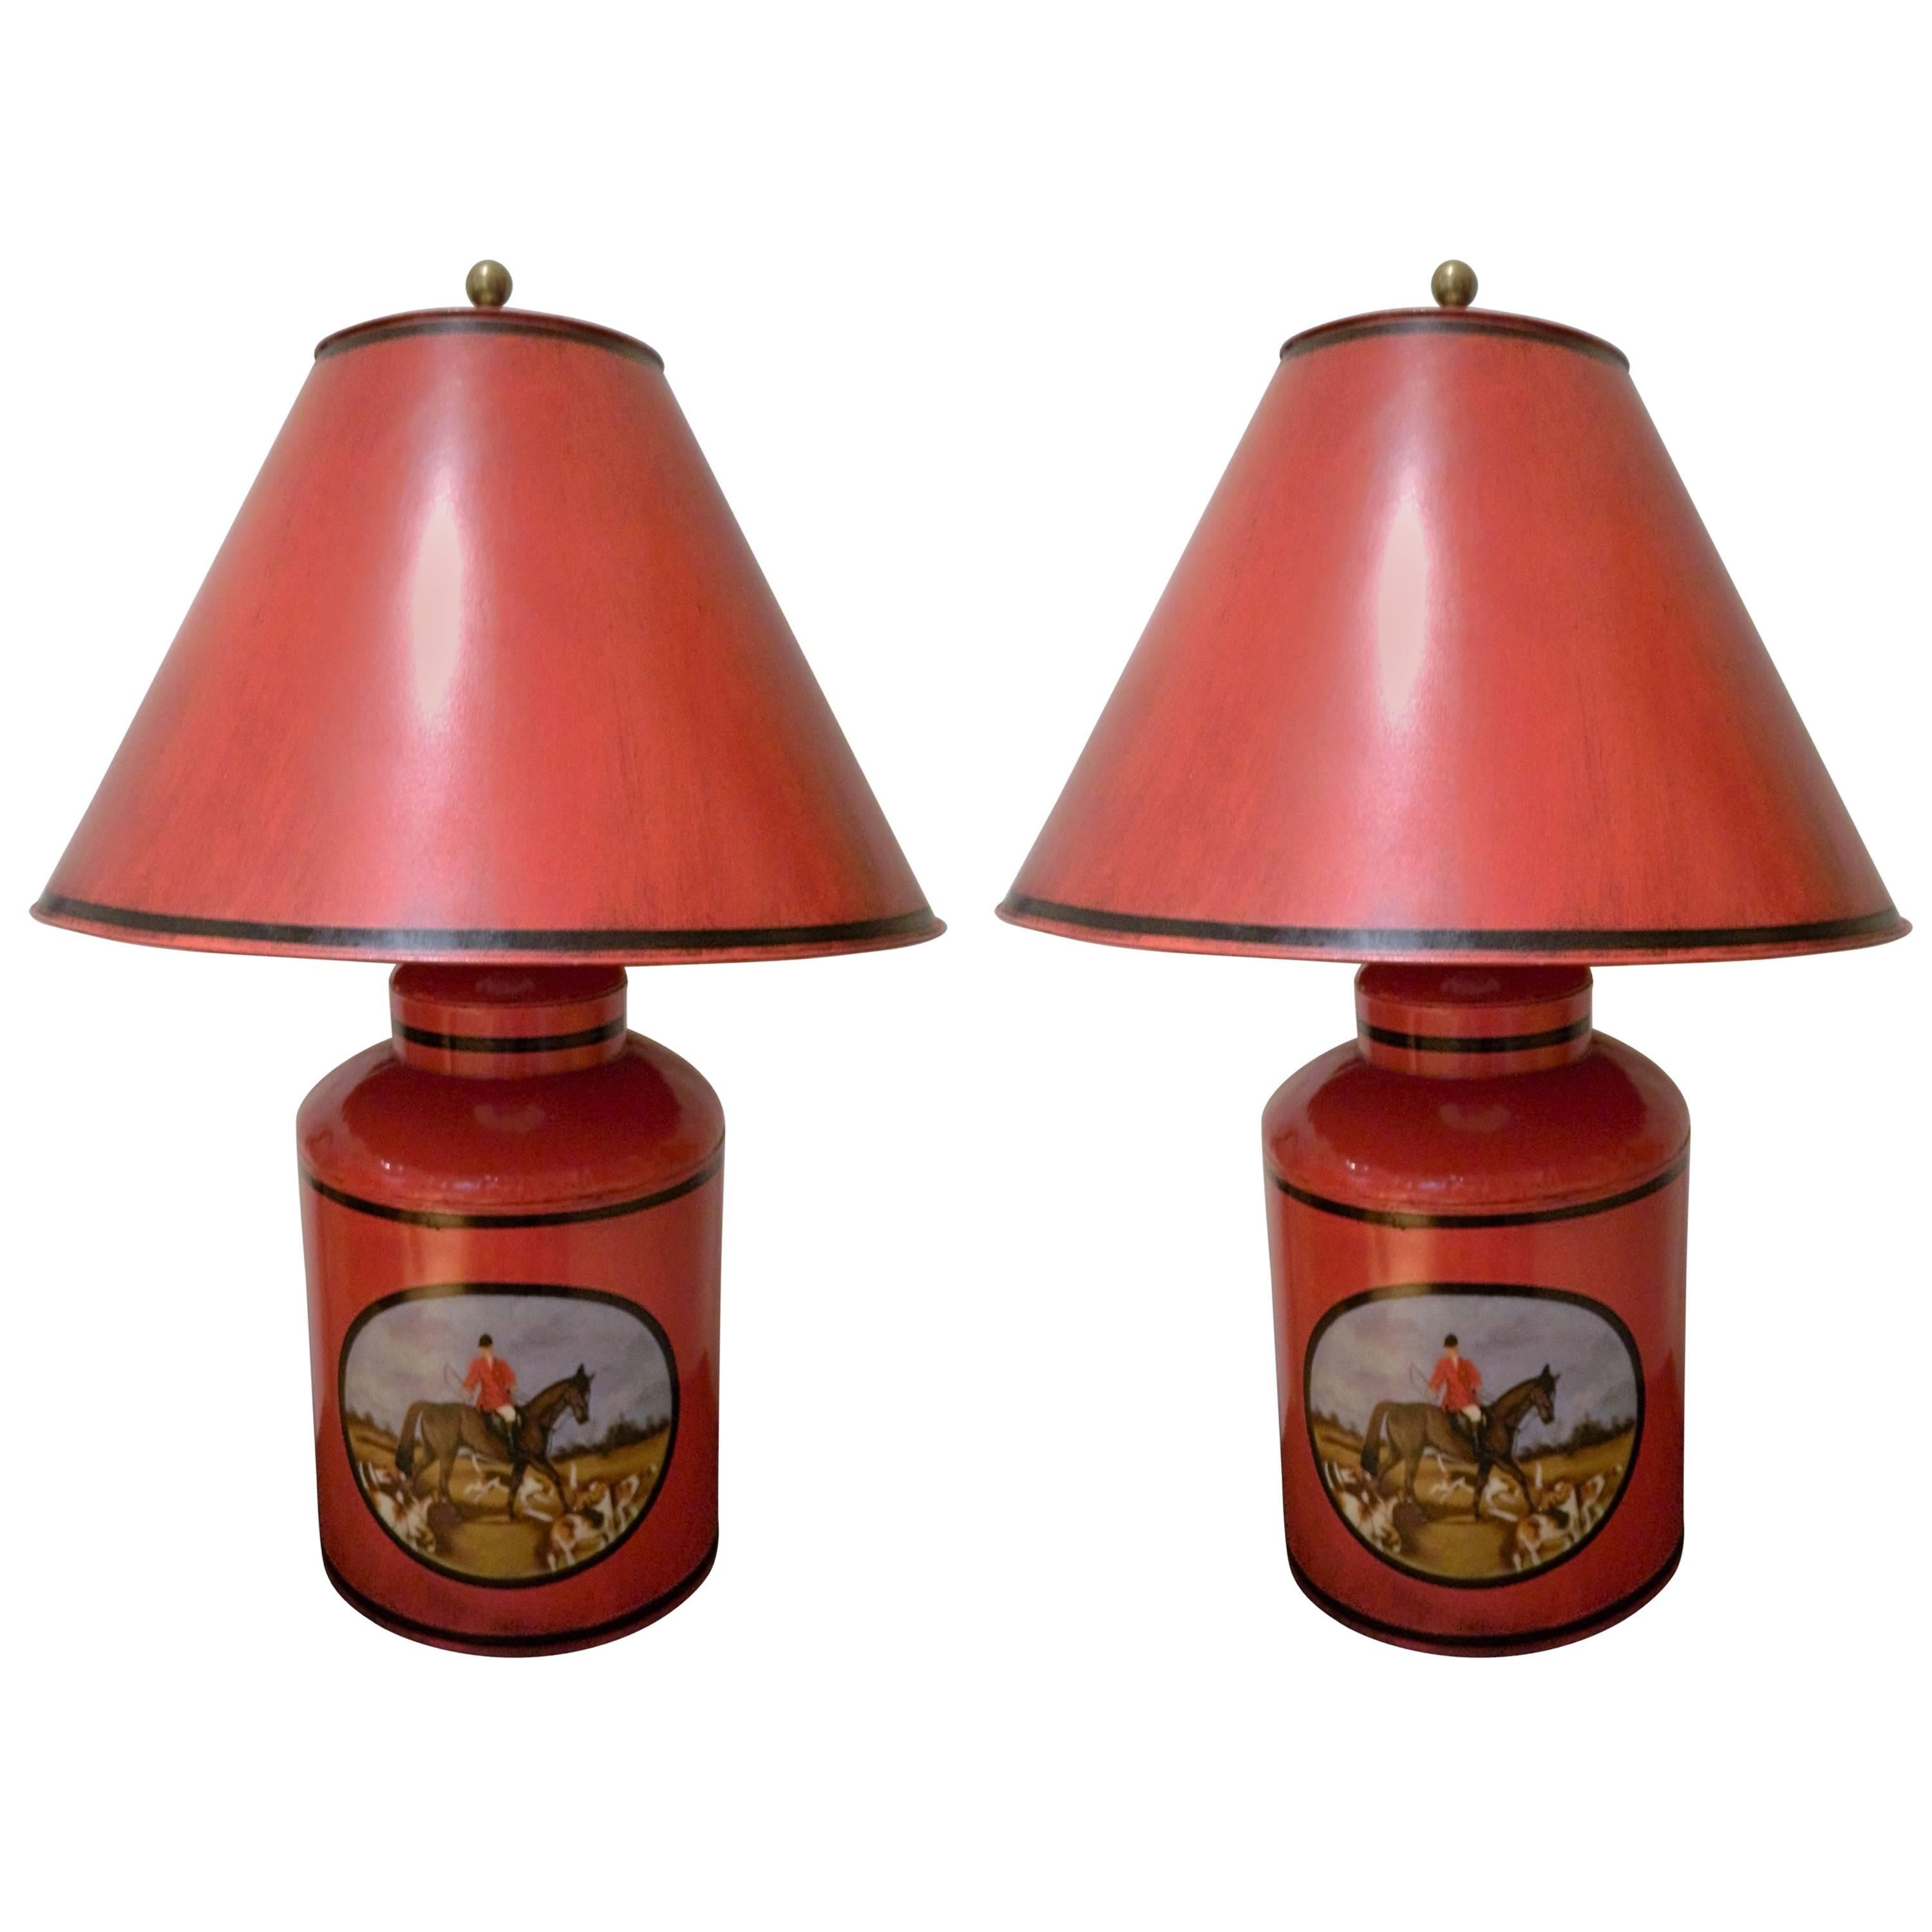 Pair of Painted Tole Canisters Adapted as Lamps with Horse Scenes, 20th Century